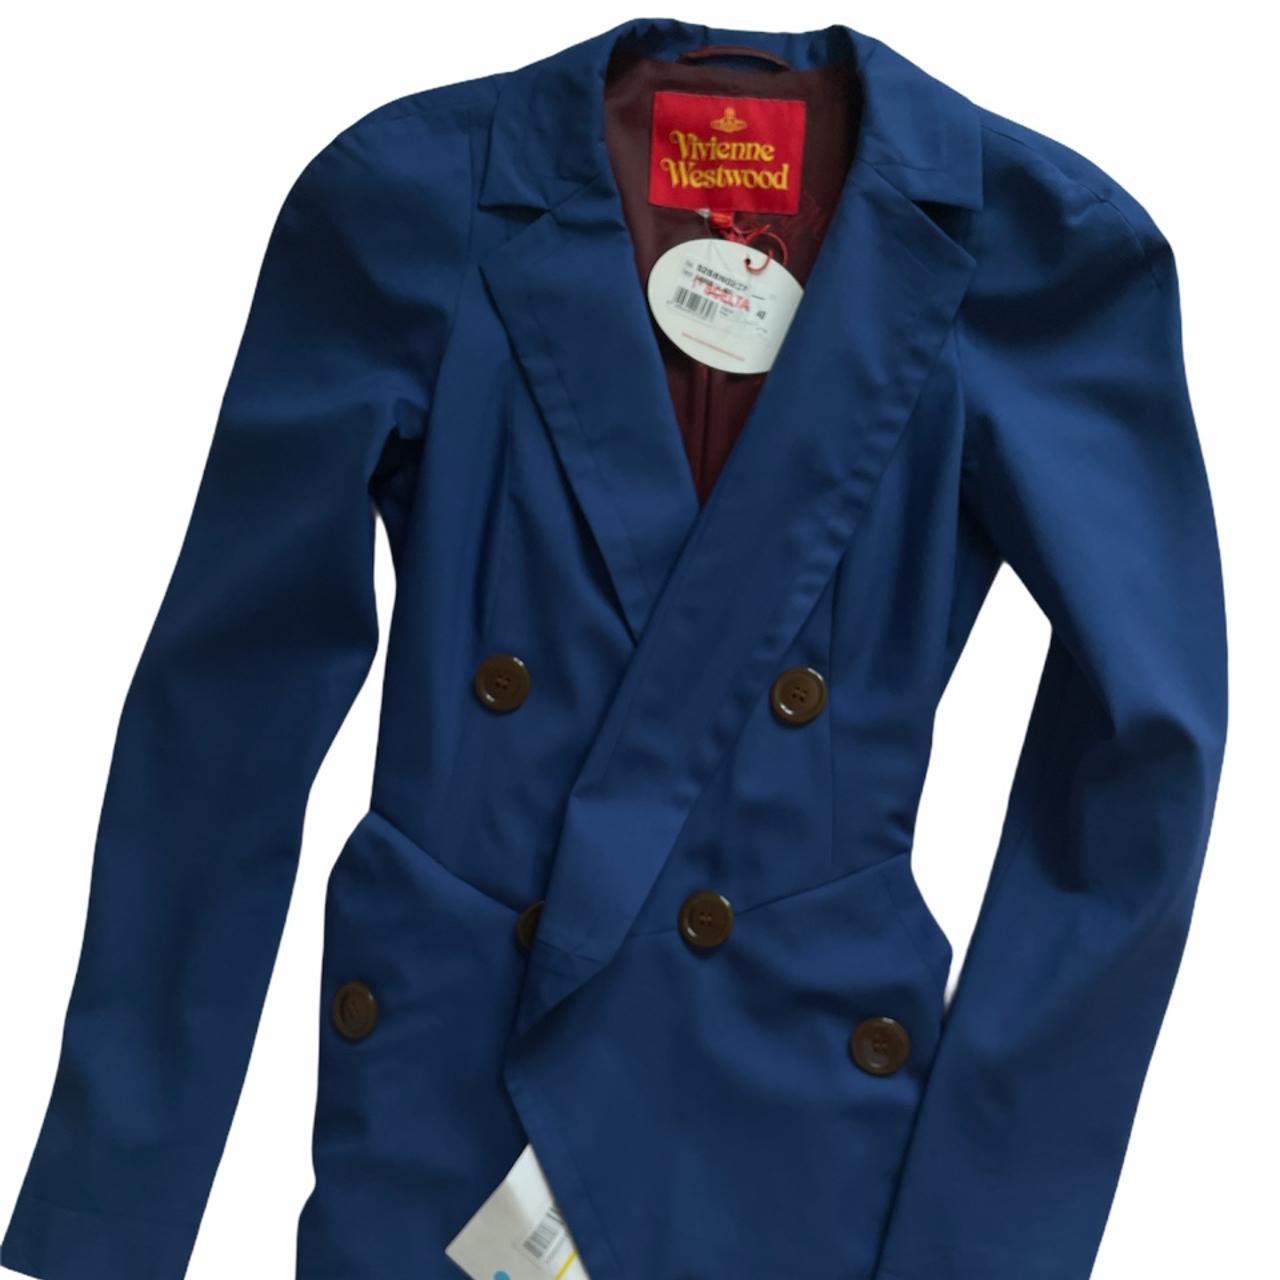 Vivienne Westwood Women's Blue and Red Jacket (2)